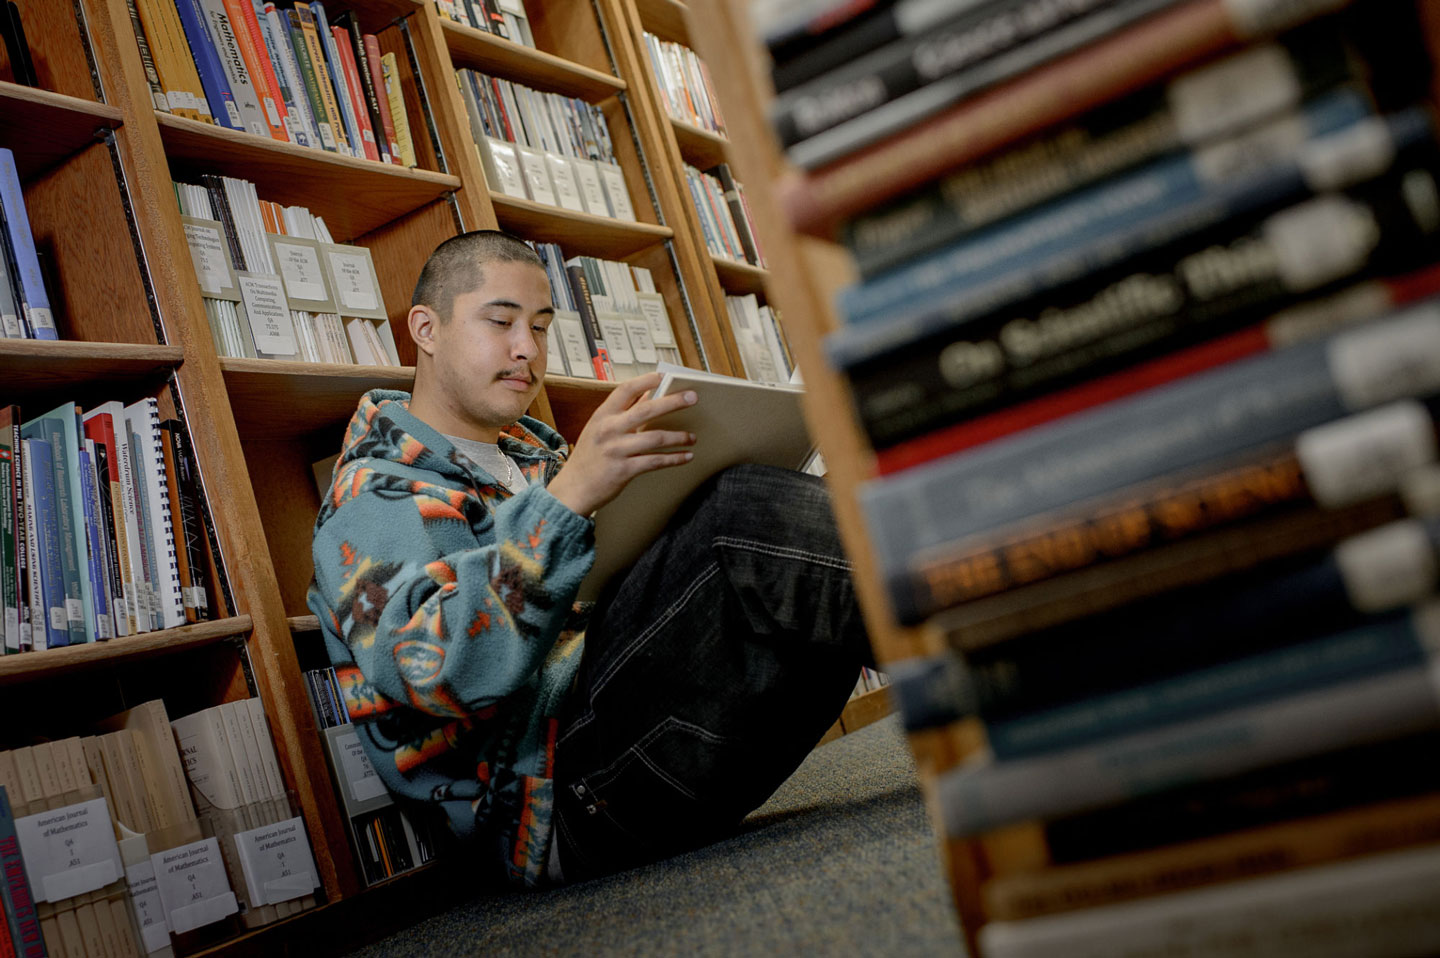 A student reading a book in a school library.